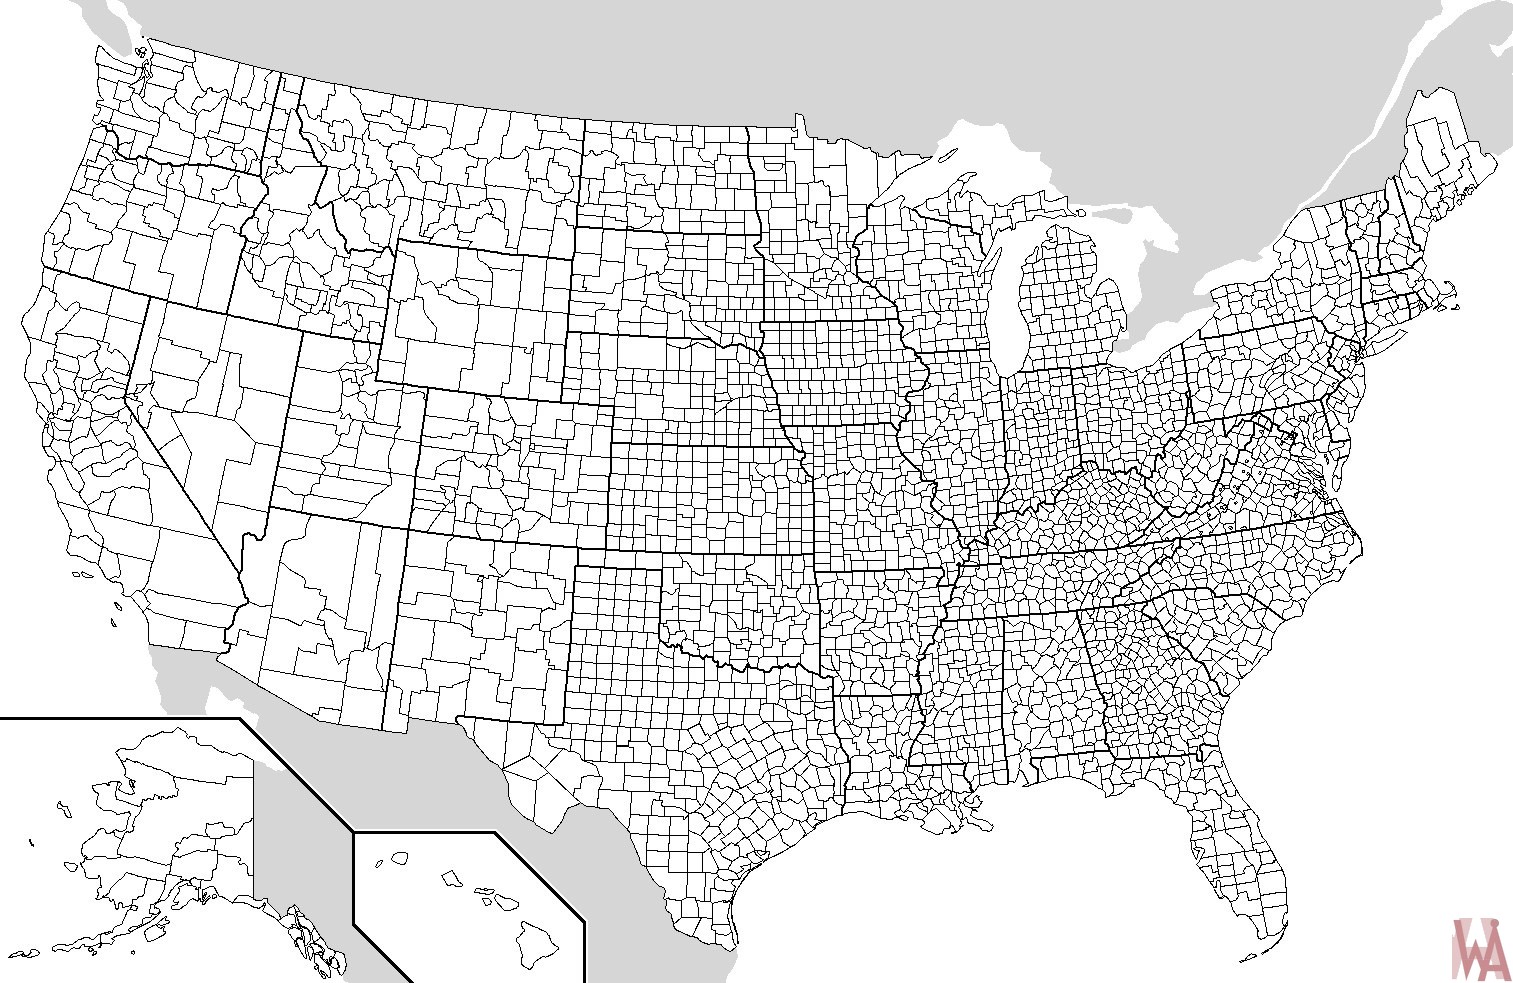 Blank Outline Map of the United States